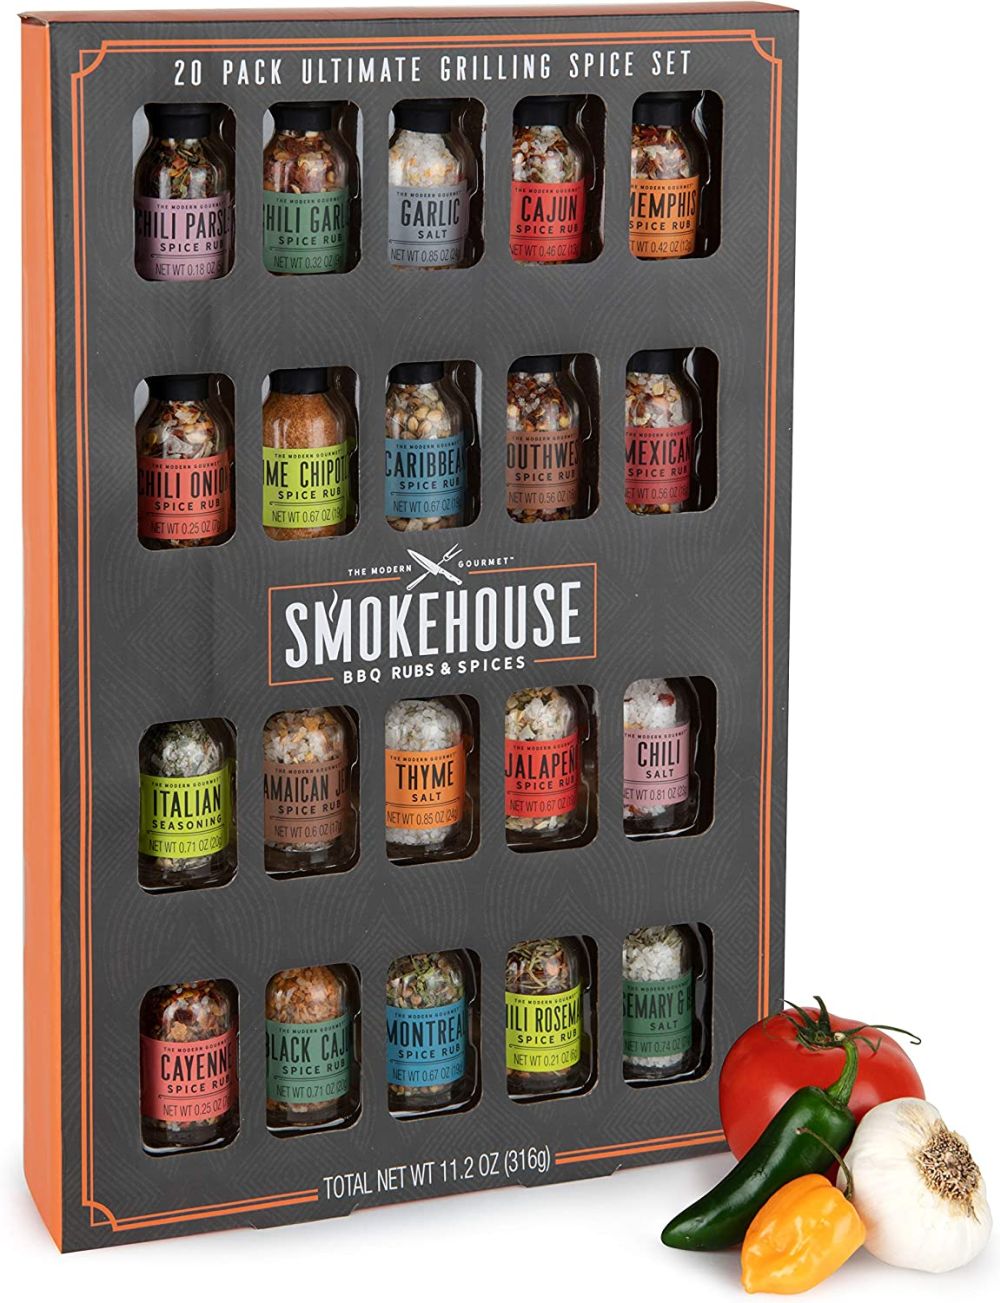 Thoughtfully ultimate grilling spice set